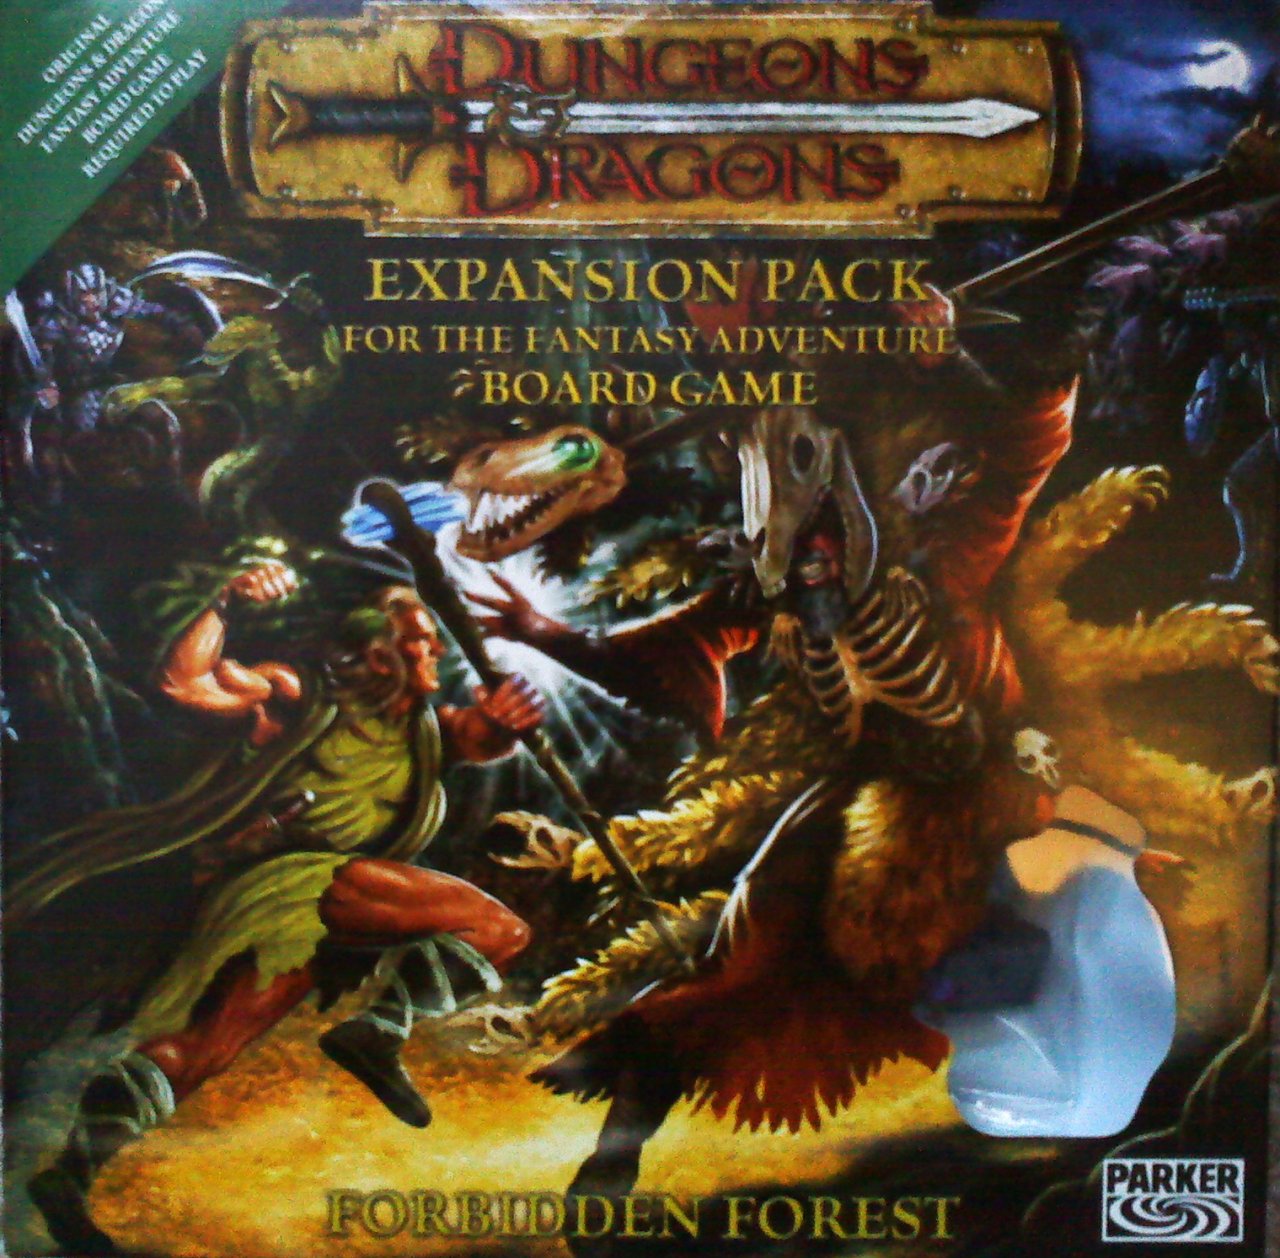 on school of dragons i got a expansion pack and it will not give me the dragon